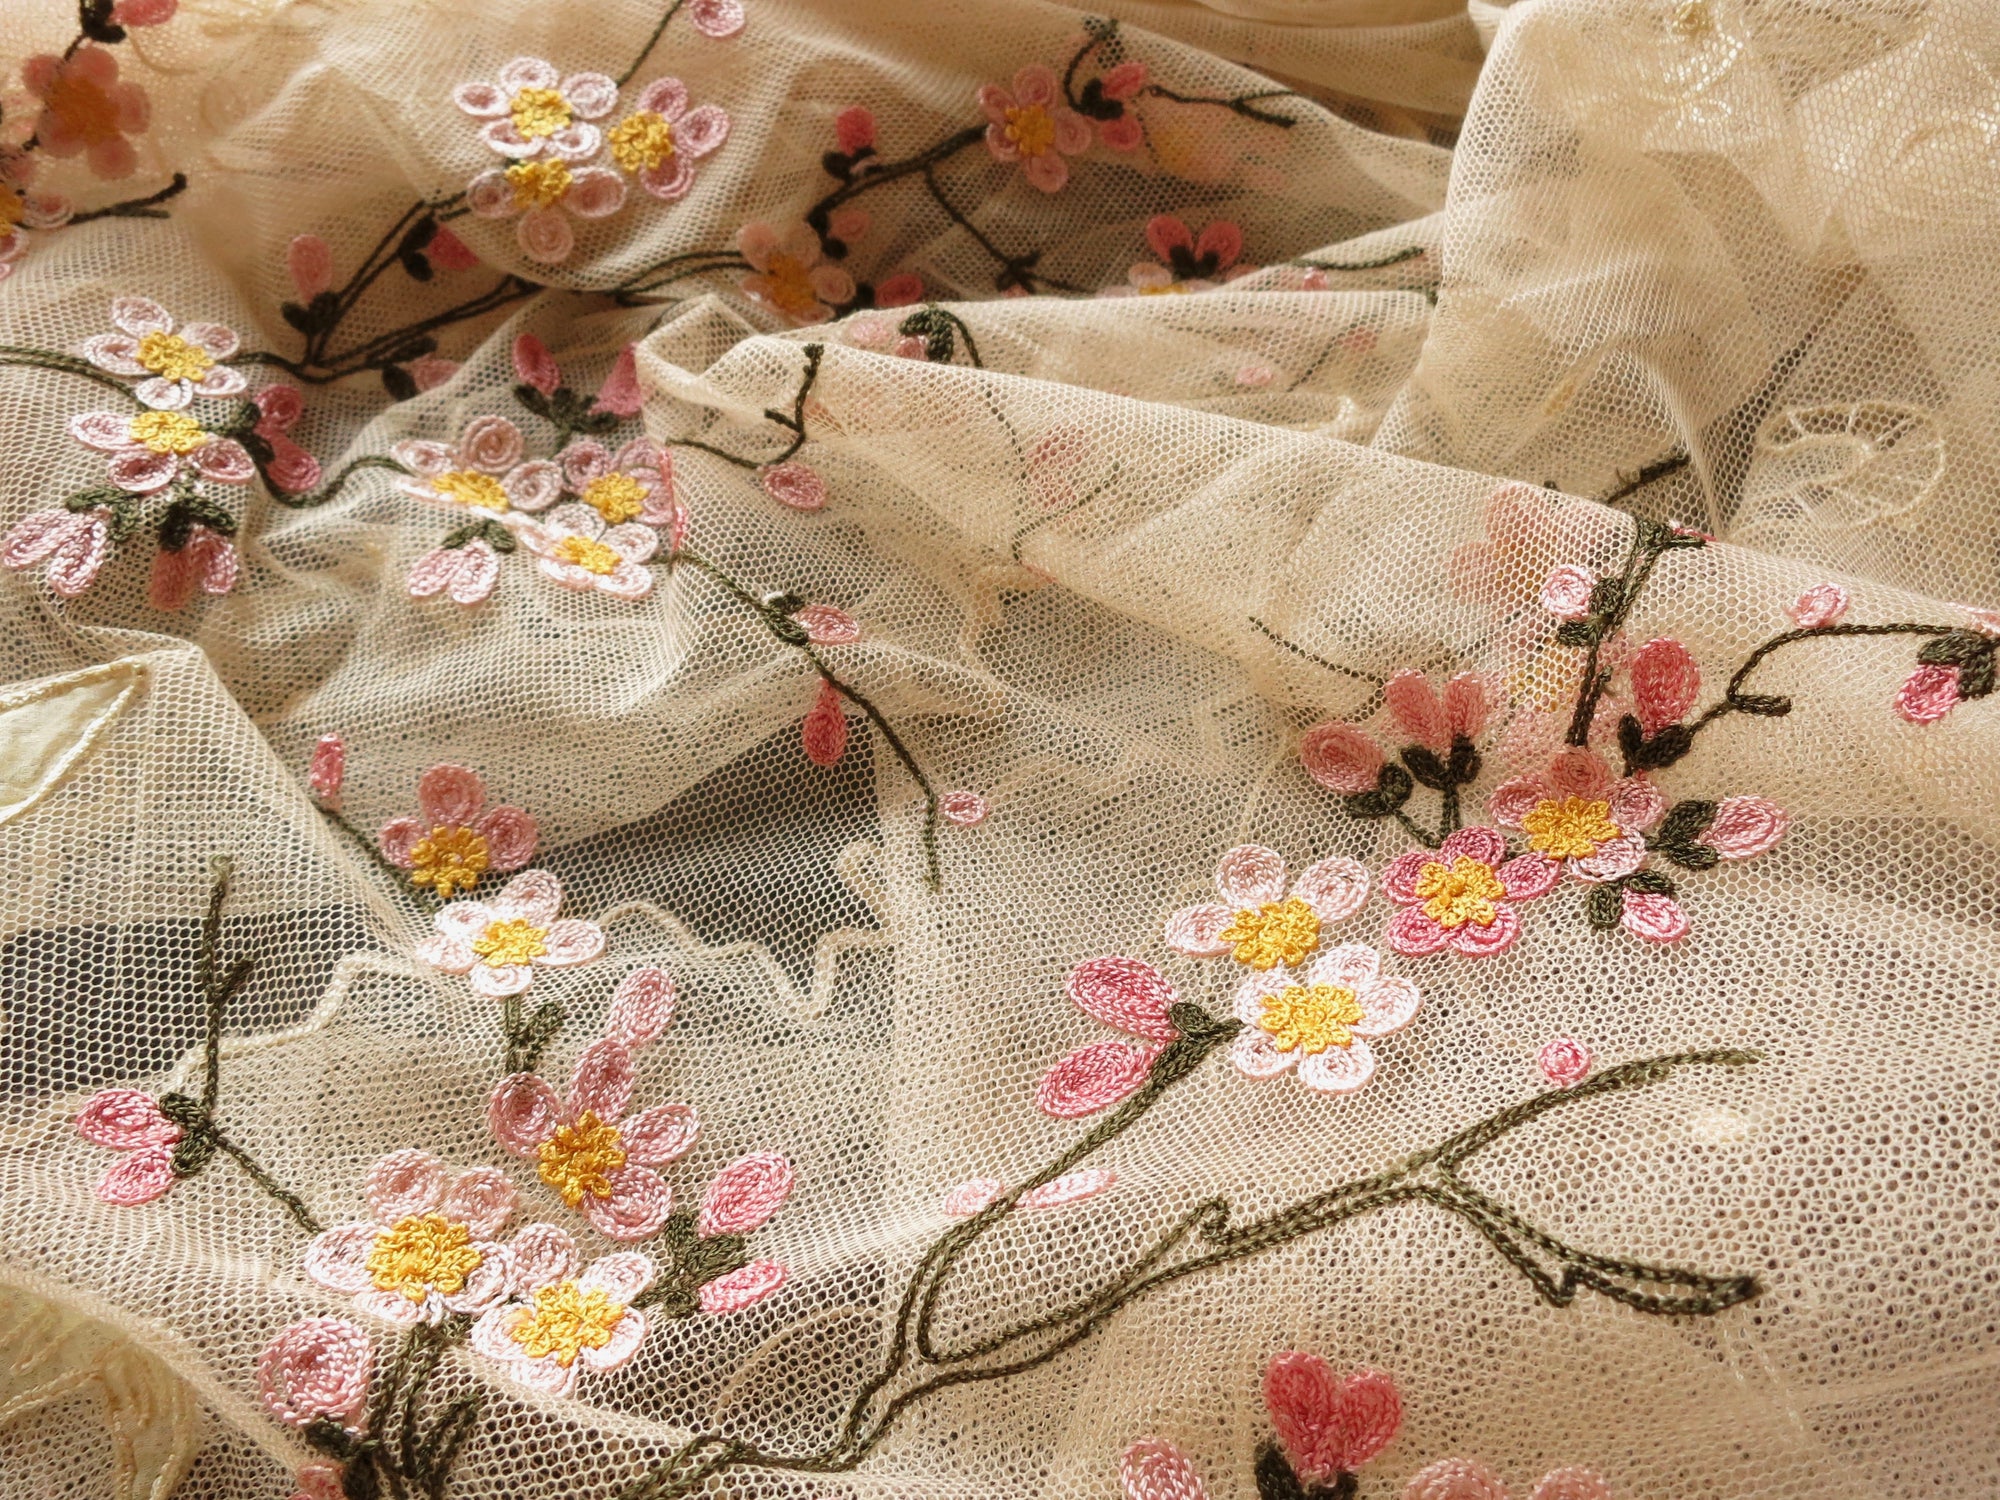 Cherry Blossoms Antique c1930 Tambour Lace Coverlet Full Size